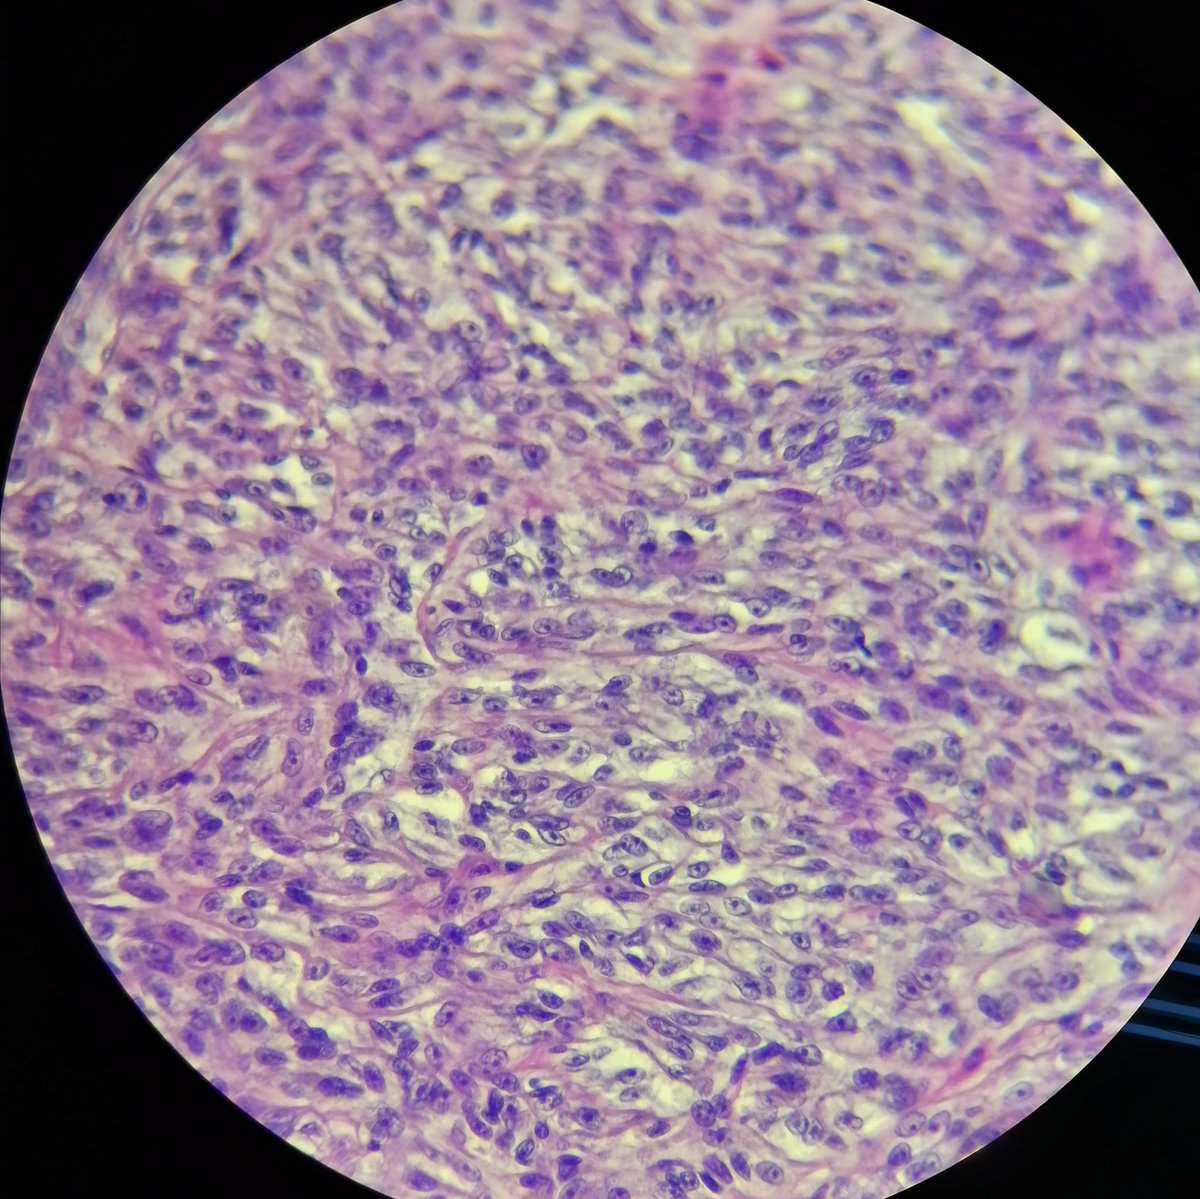 Clear cell sarcoma
34yo male, with lesion on the heel
S100 and HMB45 positive
#pathology #anapath #softtissue